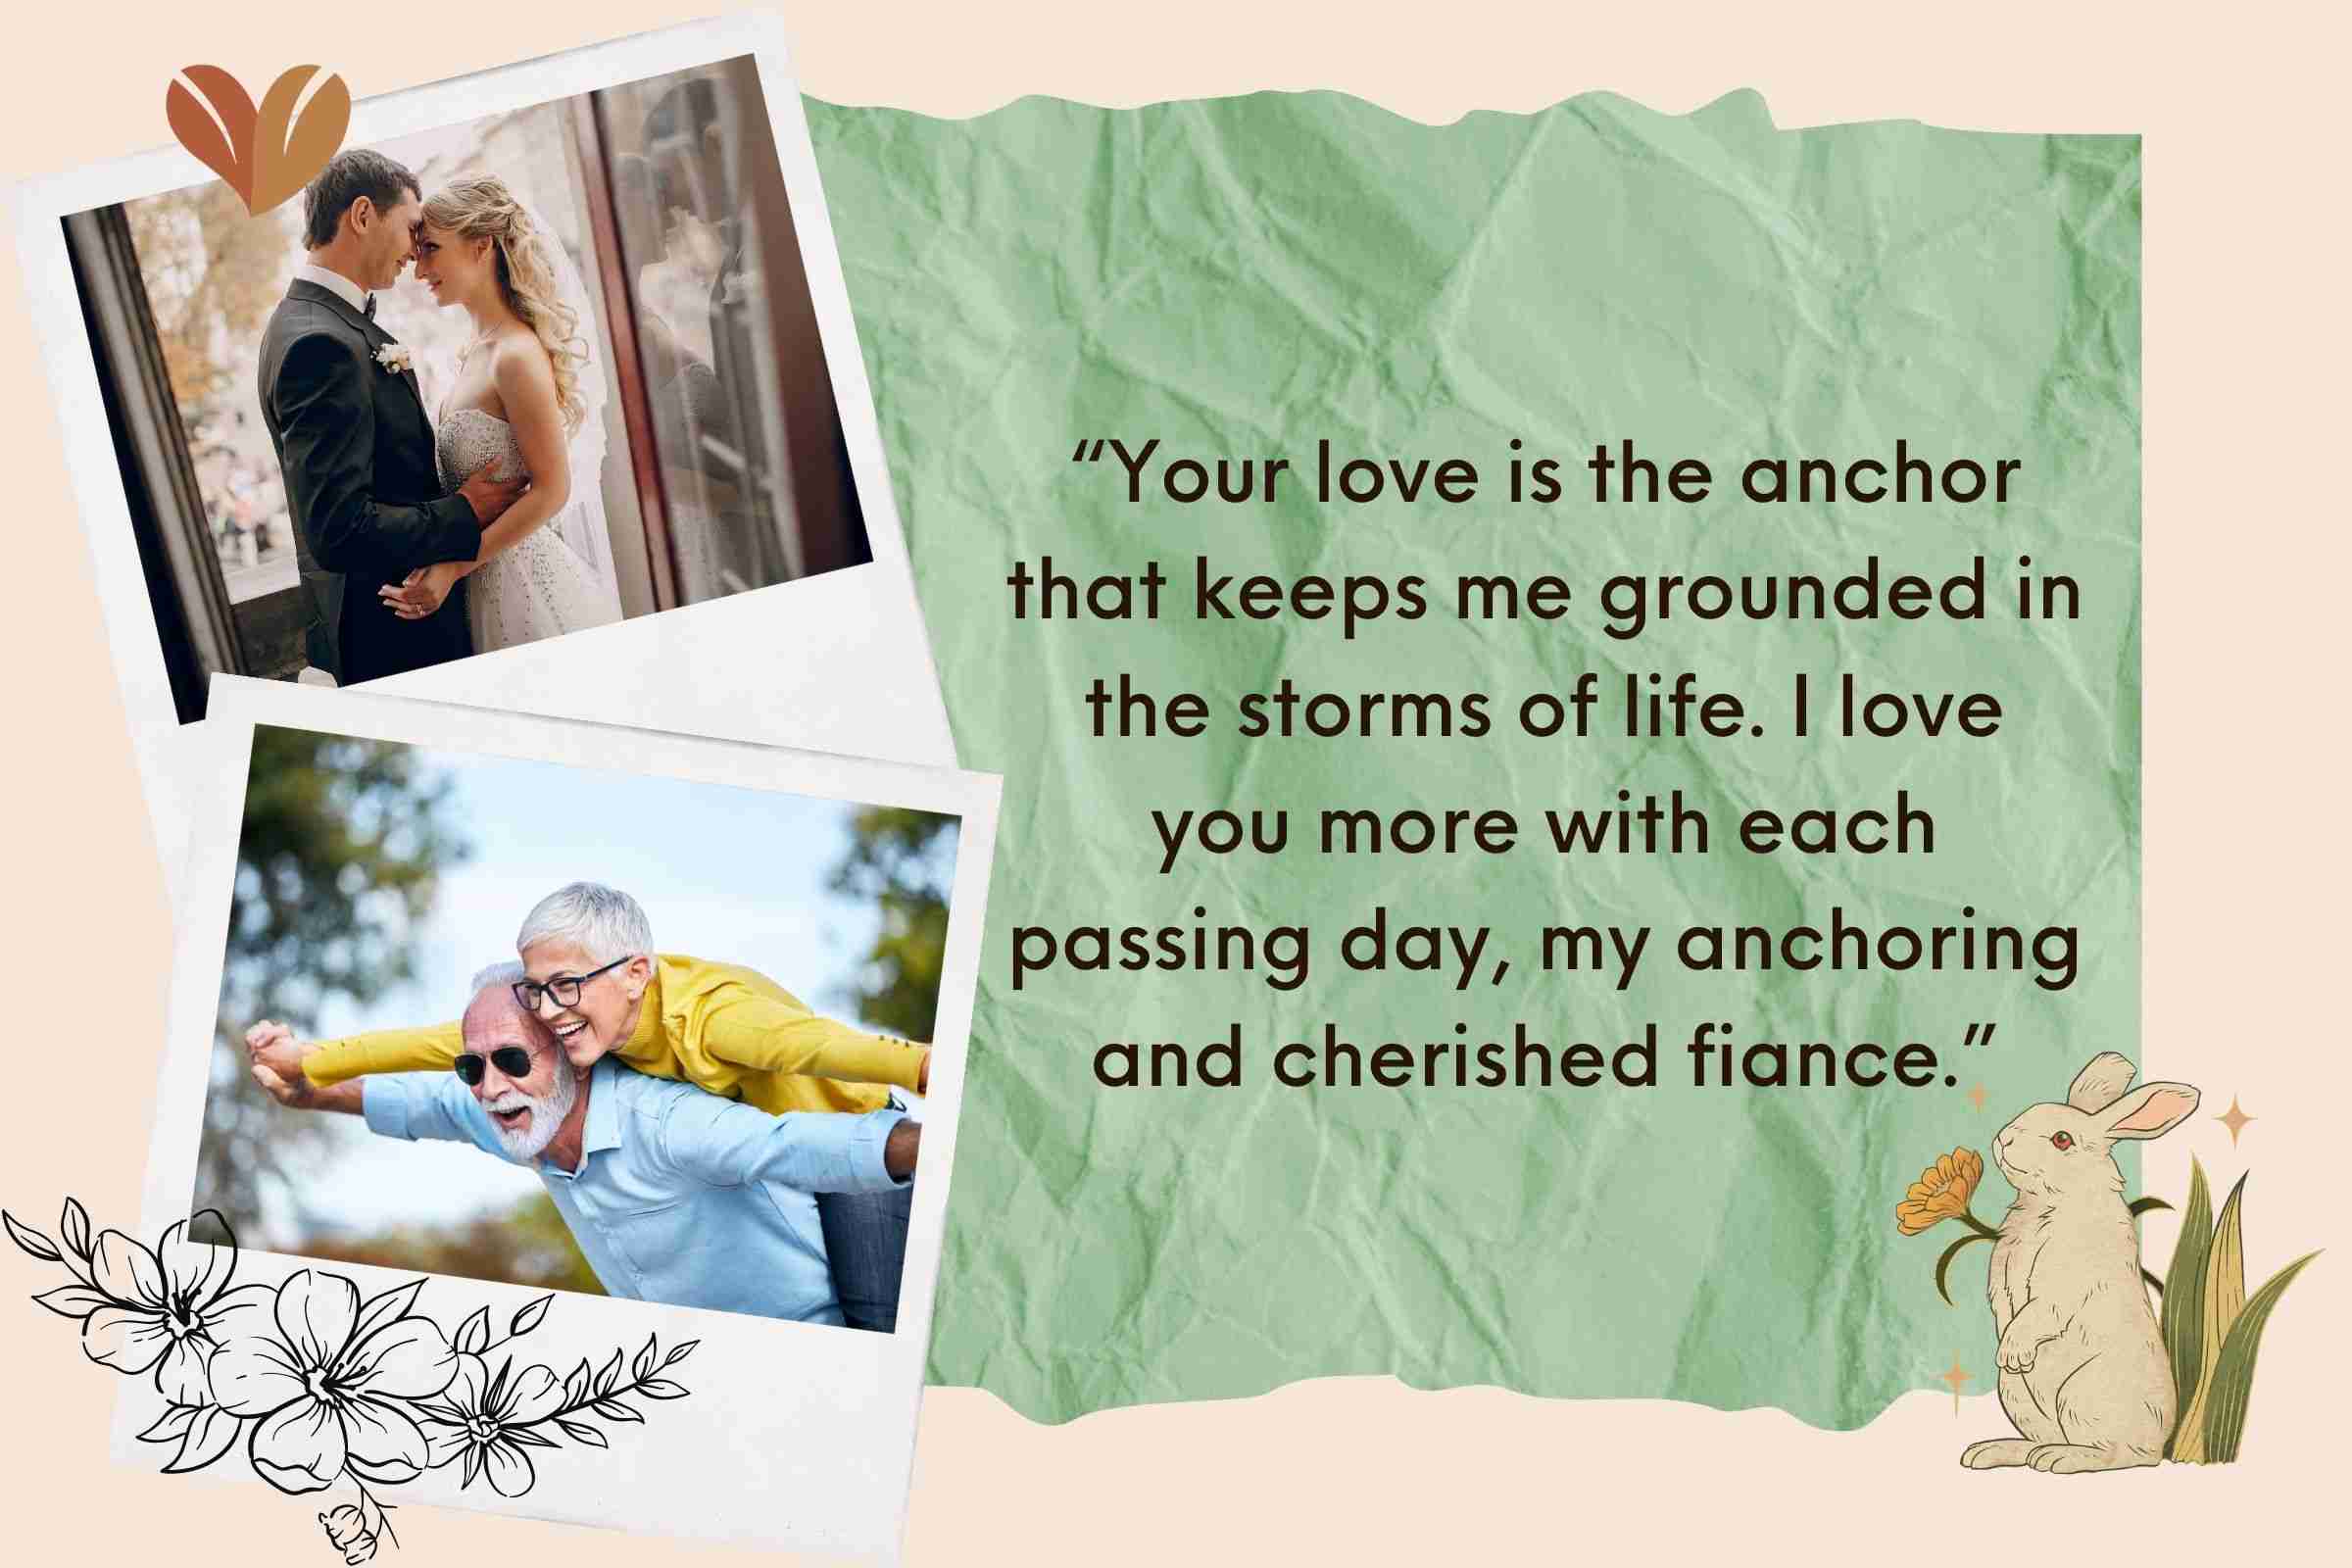 “Your love is the anchor that keeps me grounded in the storms of life. I love you more with each passing day, my anchoring and cherished fiance.”